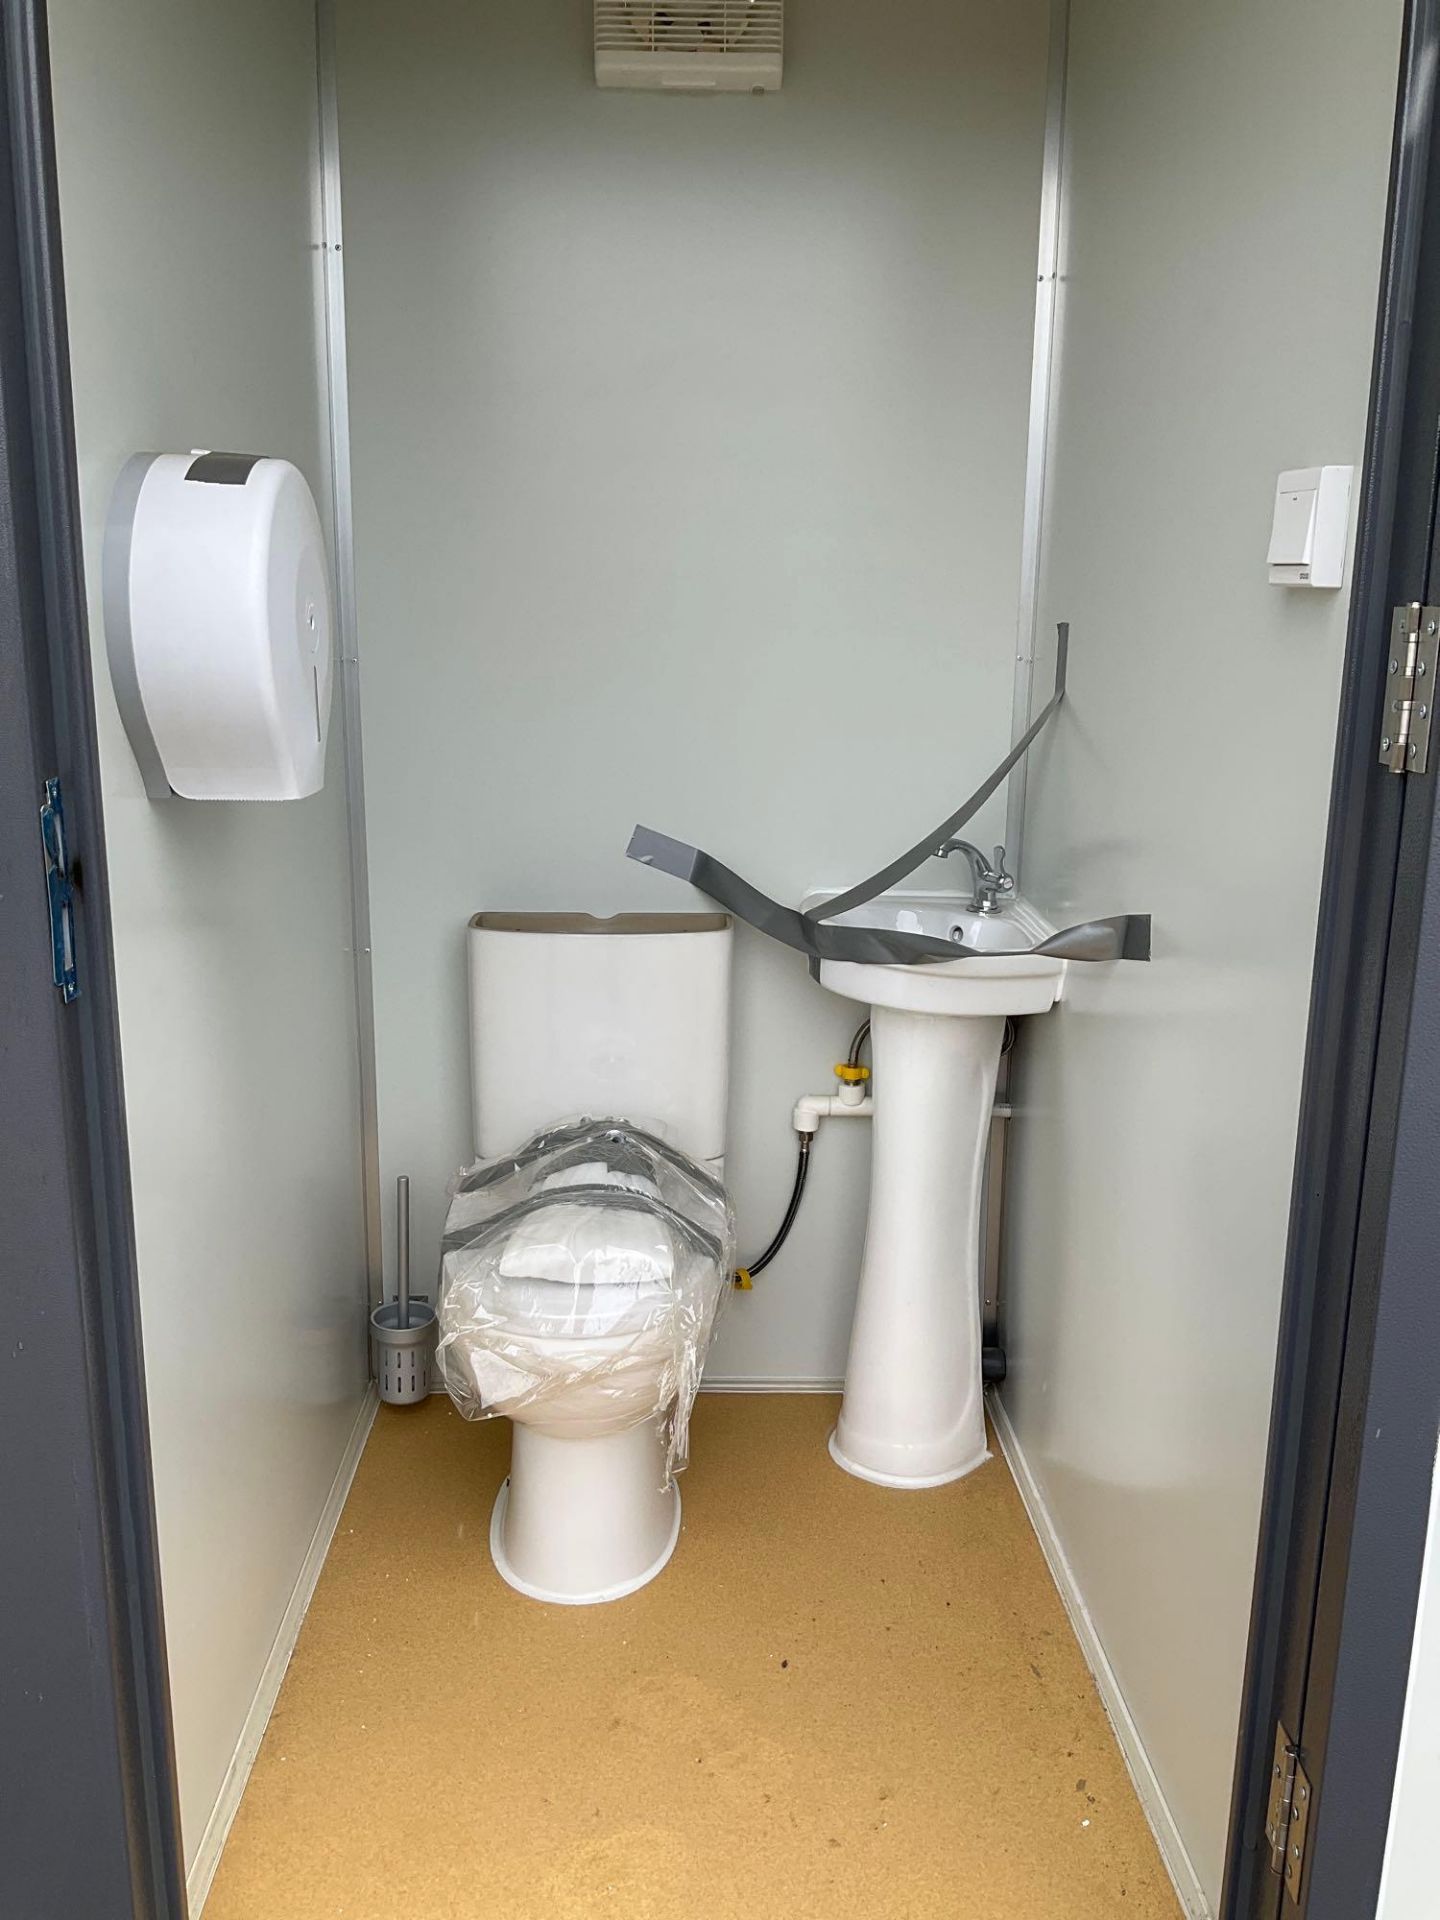 UNUSED PORTABLE DOUBLE BATHROOM UNIT, 2 STALLS, ELECTRIC & PLUMBING HOOK UP WITH EXTERIOR PLUMBING C - Image 14 of 15